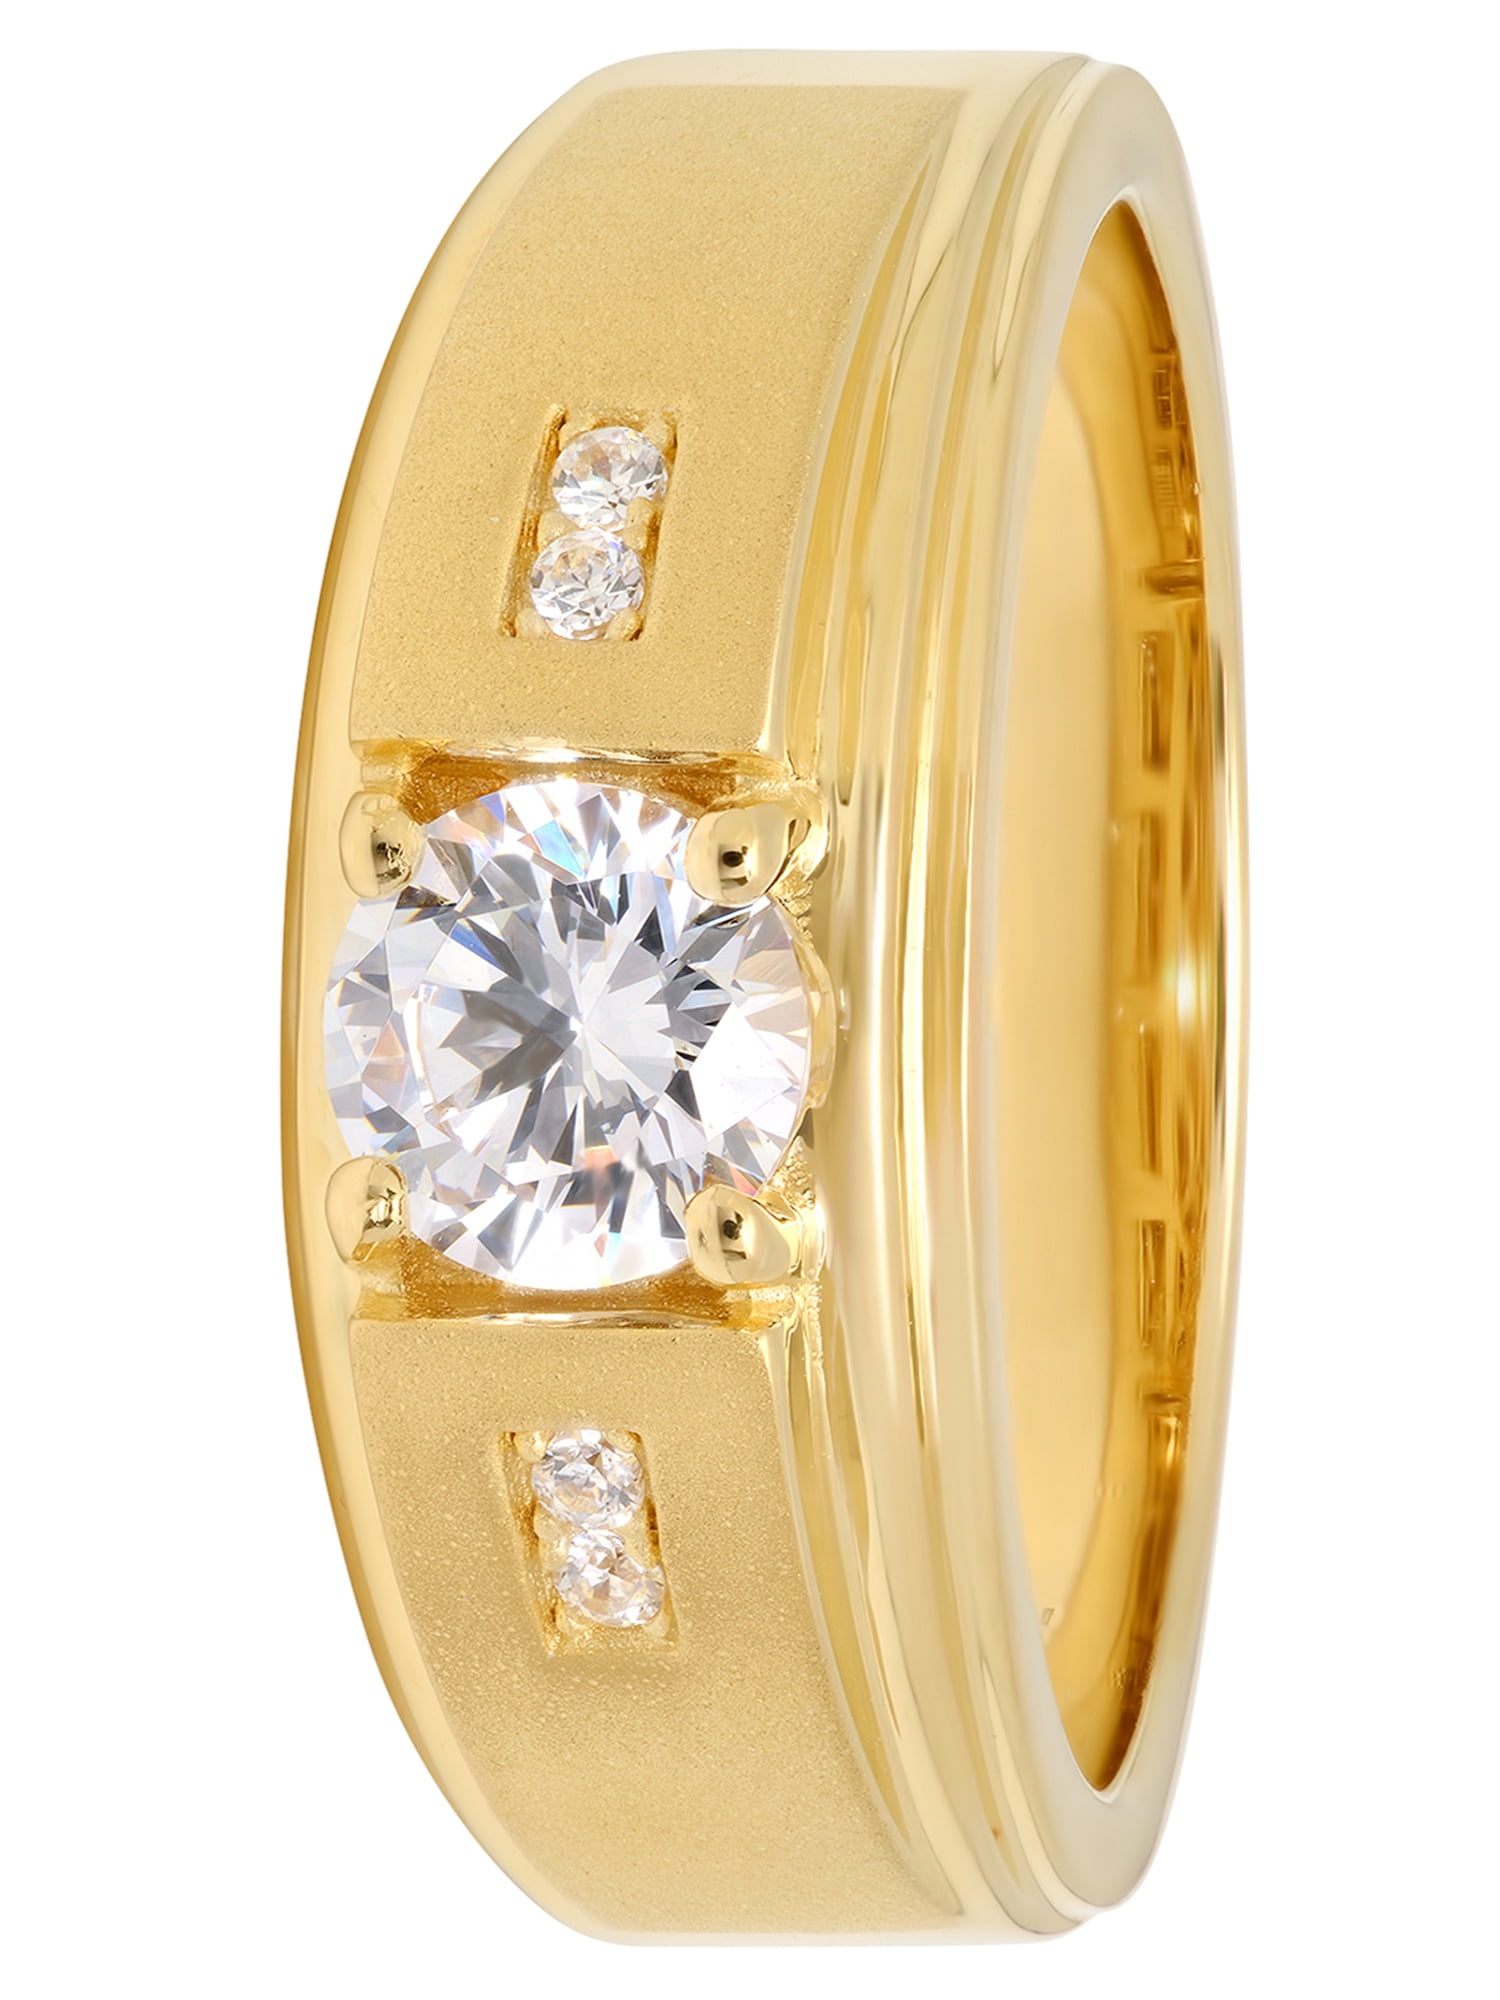 Diamond Traces 2.54ct G-SI1 Ideal Round Natural Certified Diamond 14k Gold  Classic Single Stone Pinky Men's Ring